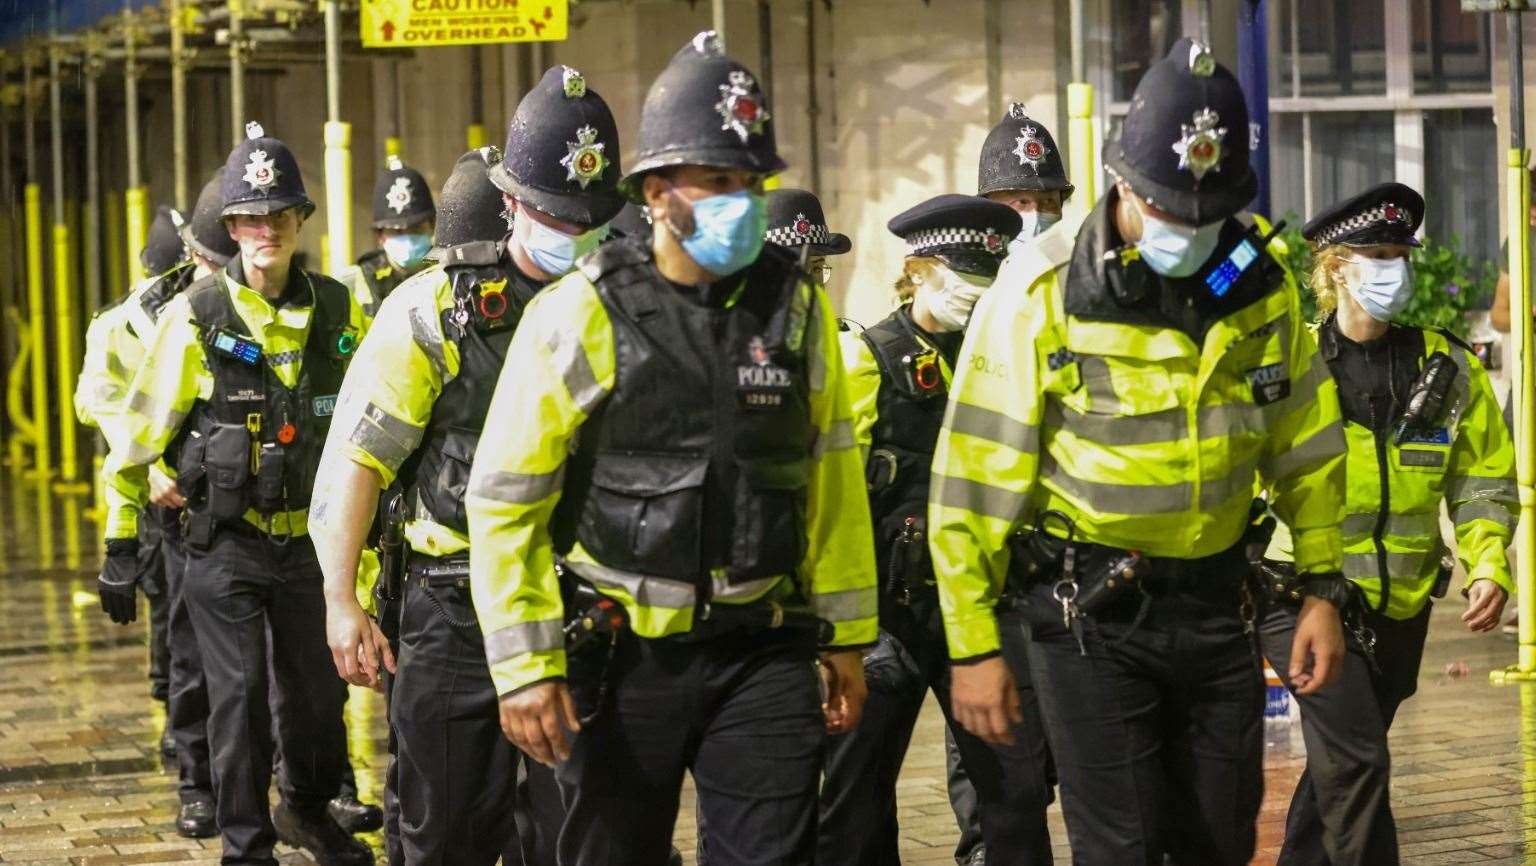 There was a heavy police presence in Maidstone after England's defeat Picture: UK News in Pictures